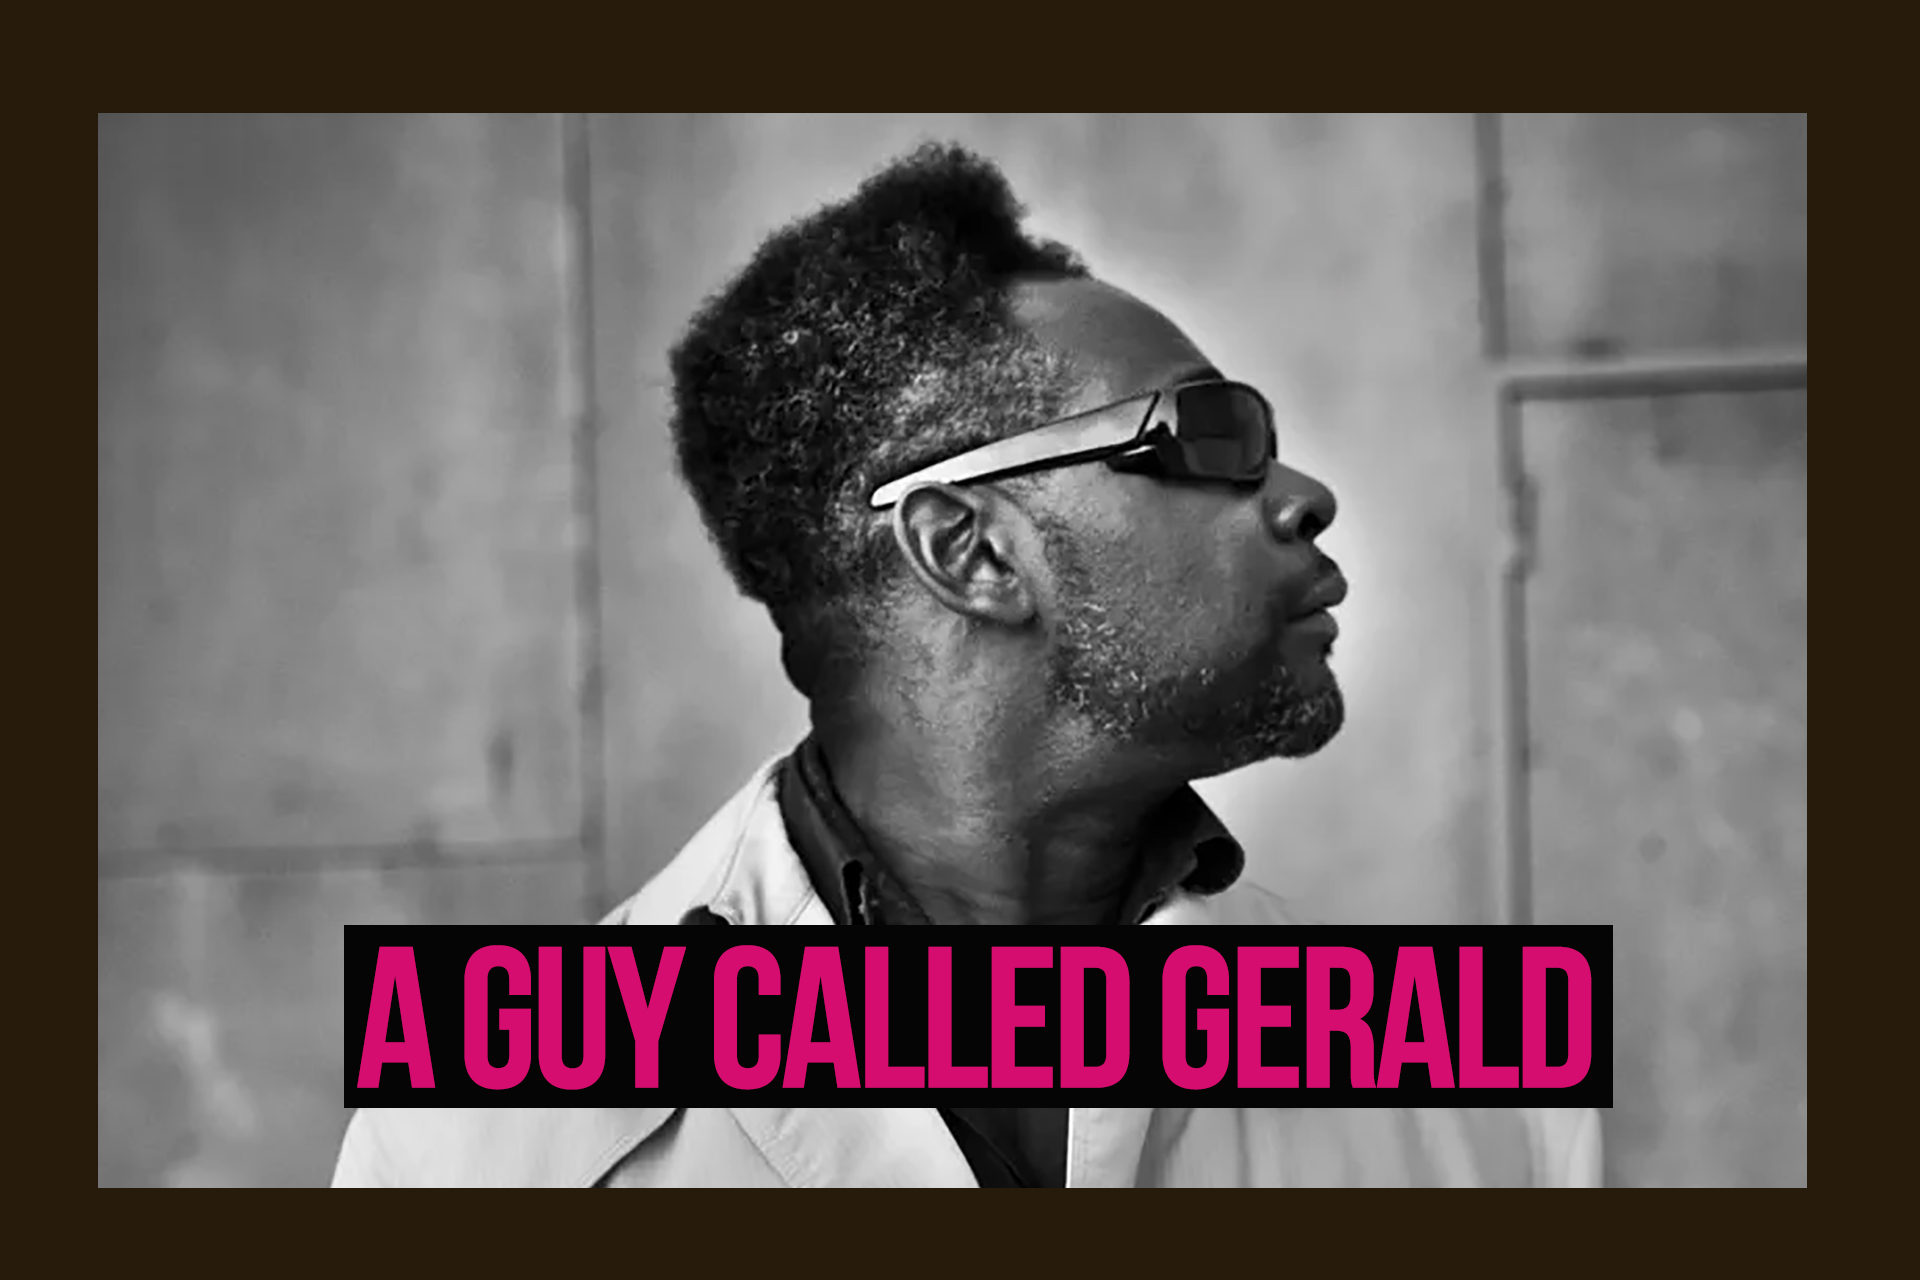 A GUY CALLED GERALD